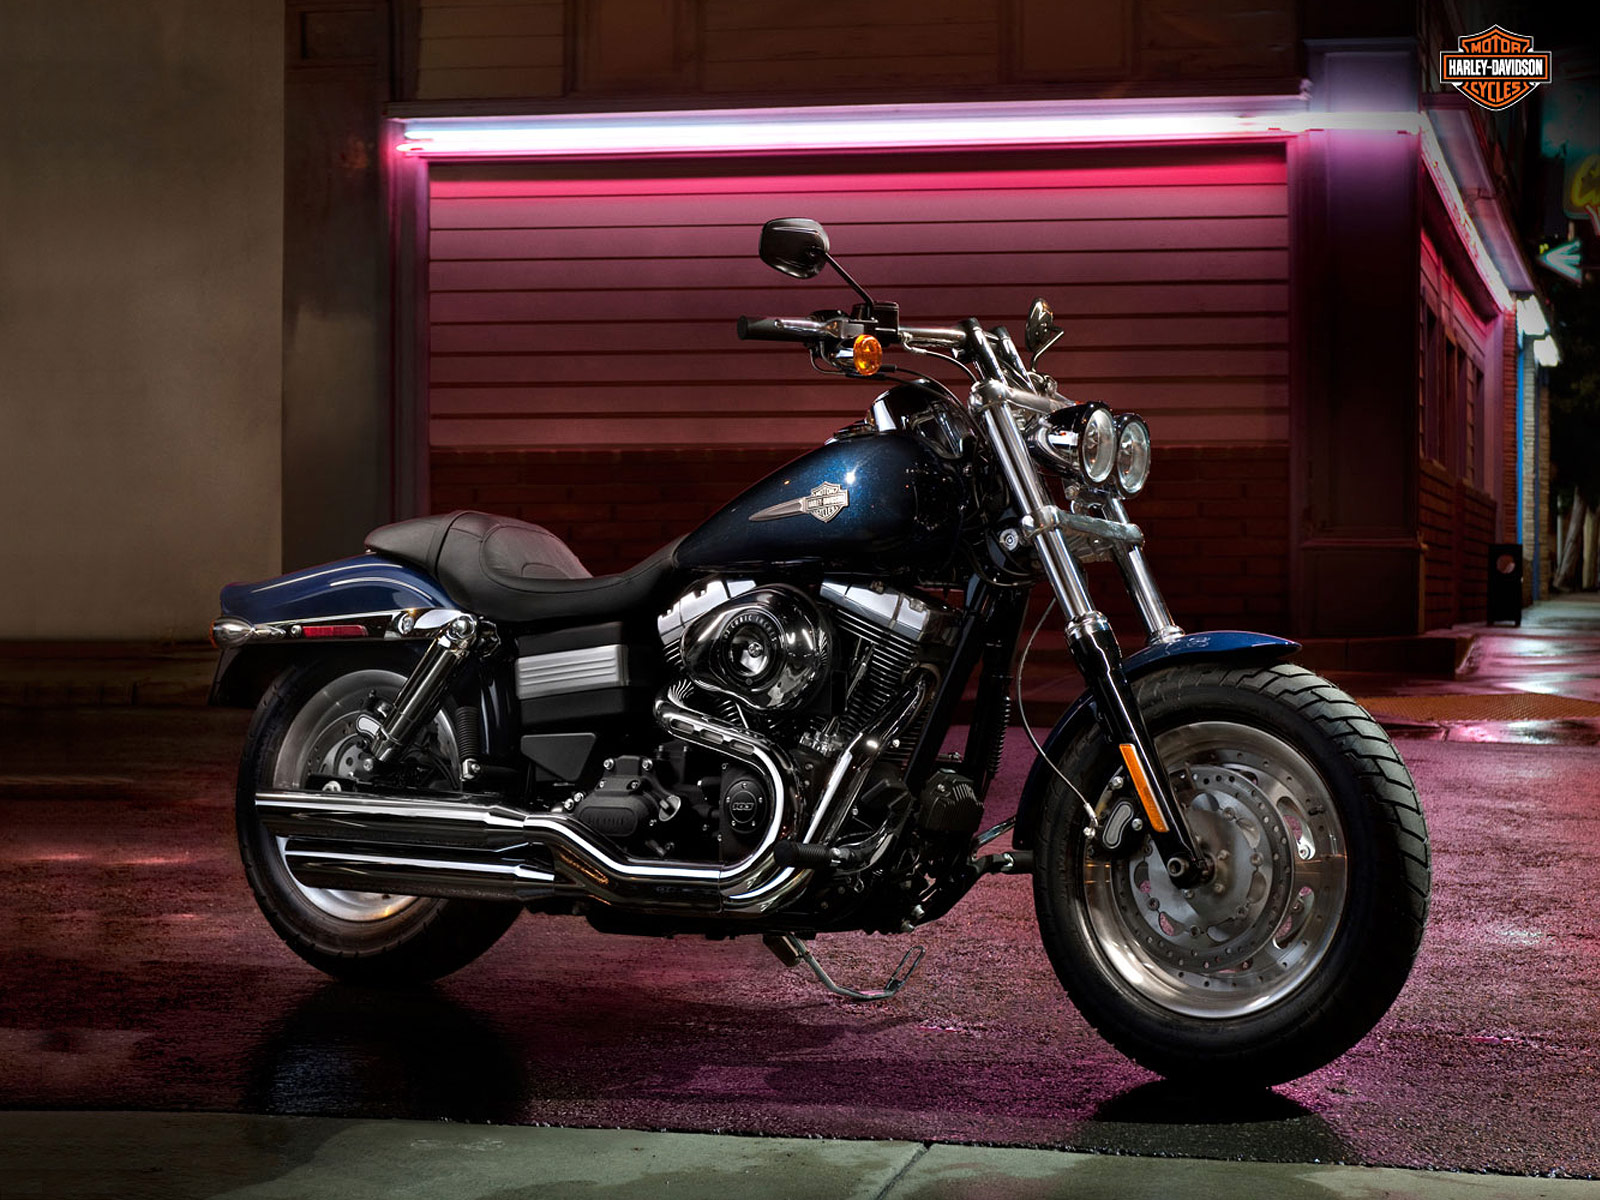 2012 FXDF Dyna Fat Bob Harley-Davidson pictures, review, specs